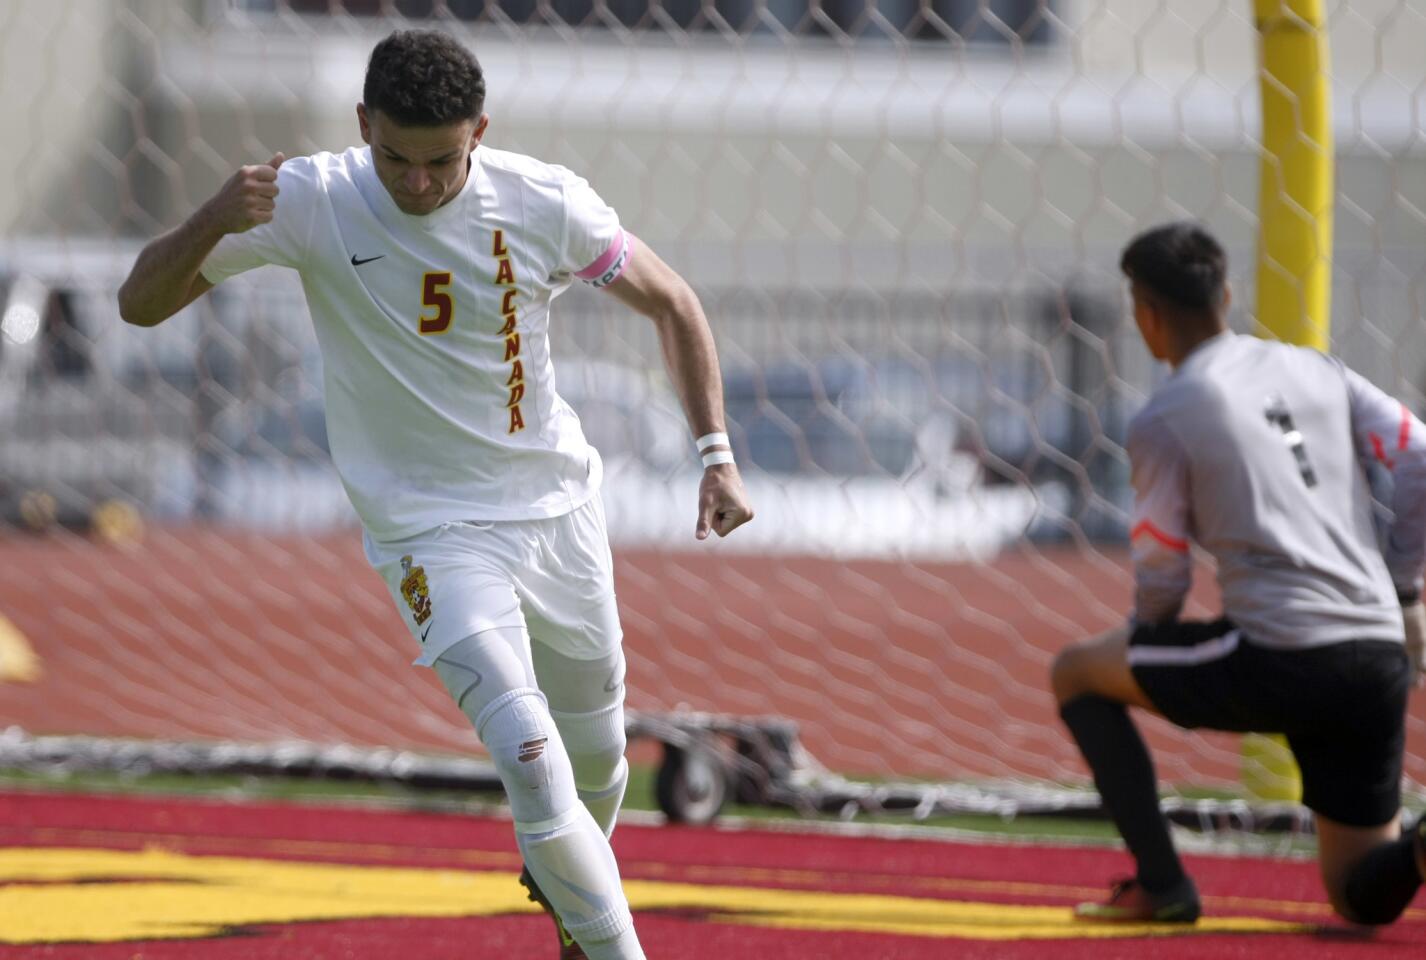 La Cañada High School boys soccer player #5 Sam Adida celebrates scoring a goal during the penalty kicks phase of the game vs. Nogales High School in CIF playoff game at home in La Cañada Flintridge on Saturday, Feb. 25, 2017. LCHS won the game 5-3 in PKs.